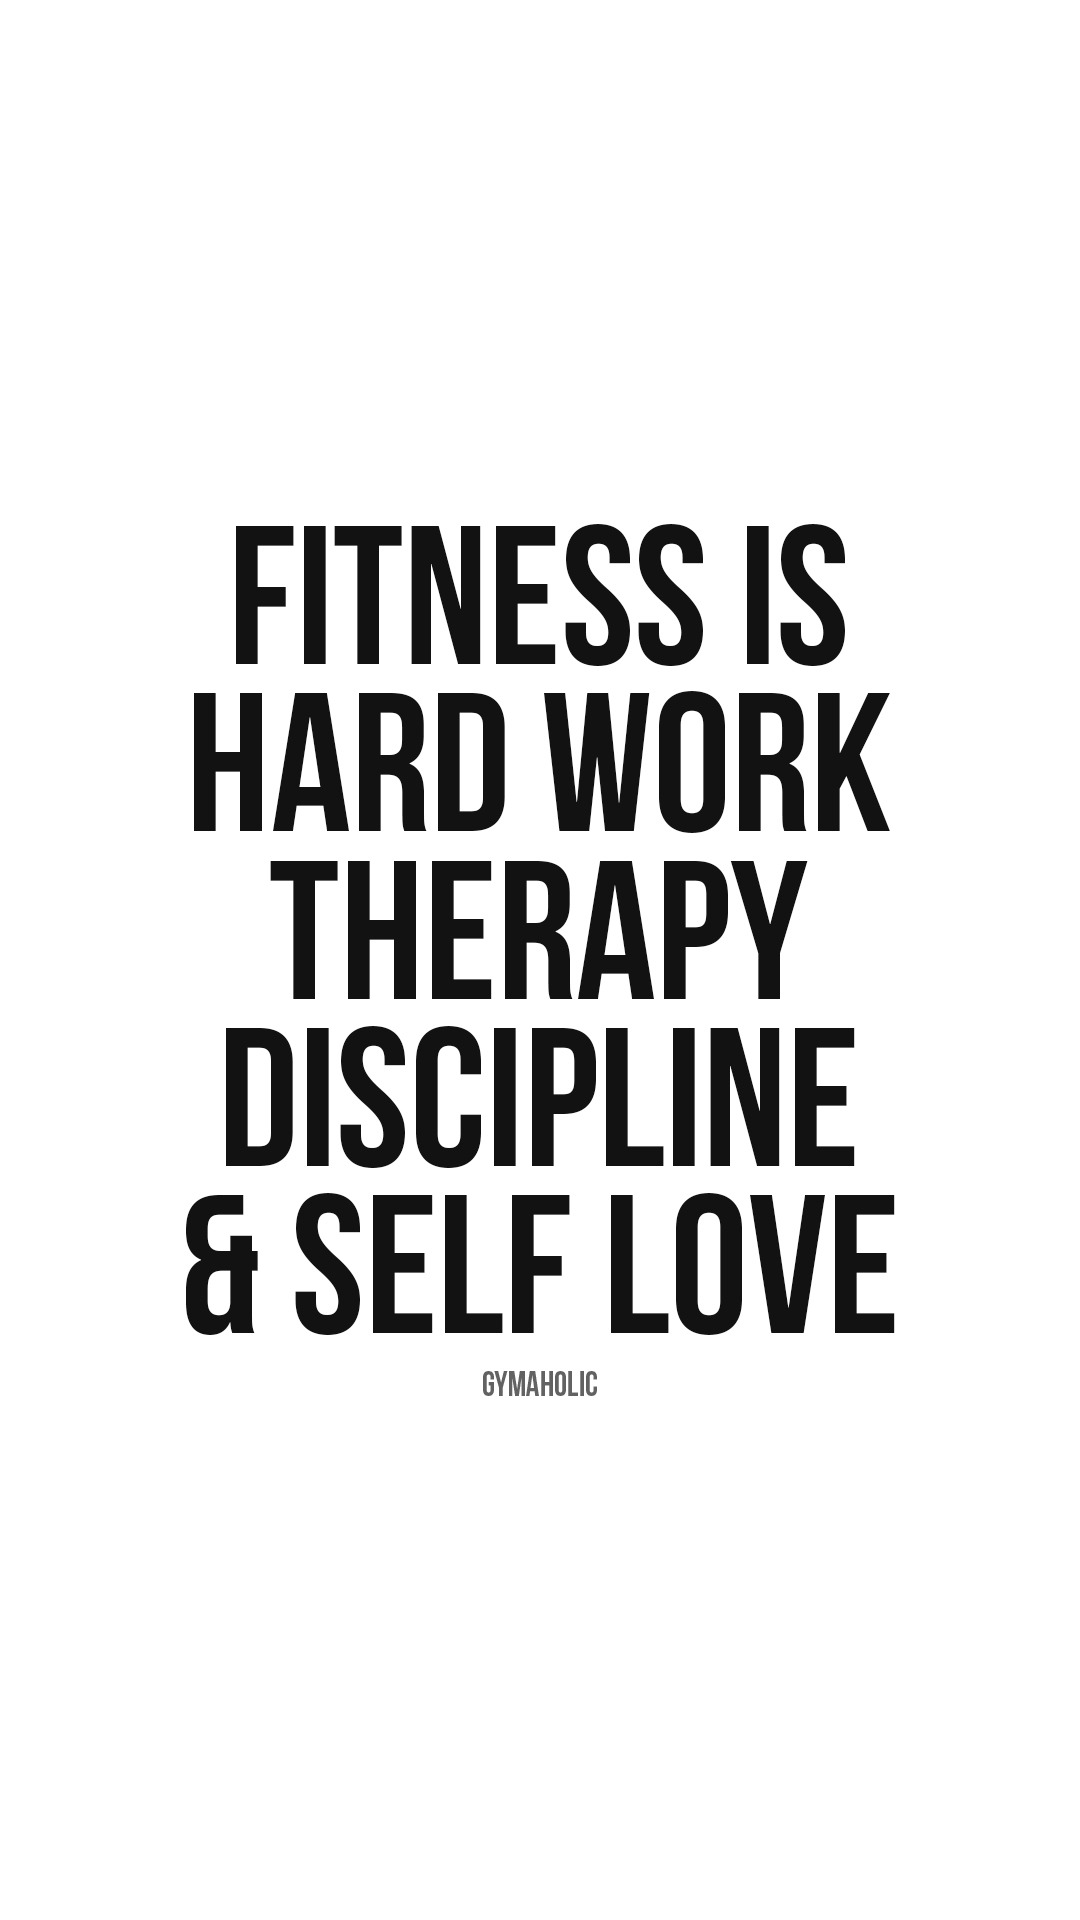 Fitness is hard work, therapy, discipline & self love